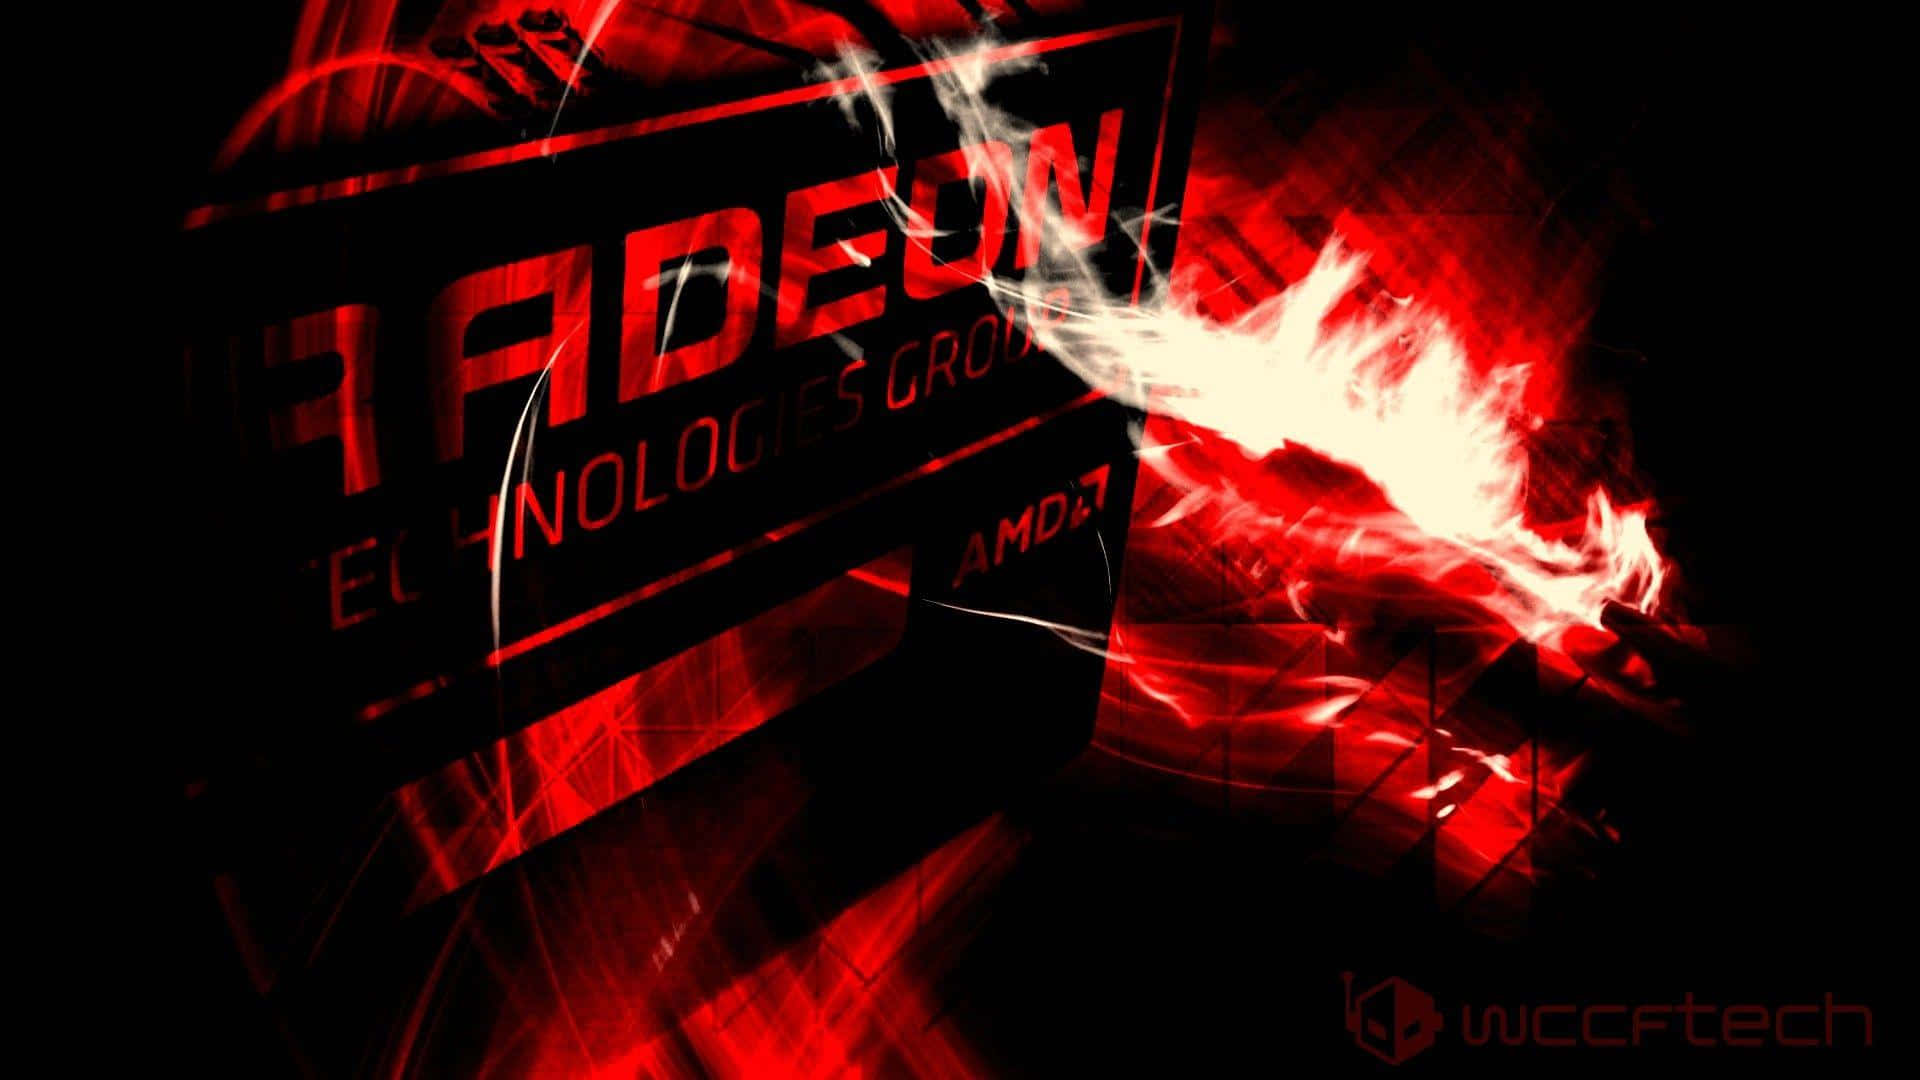 AMD's latest technological advancement in gaming systems